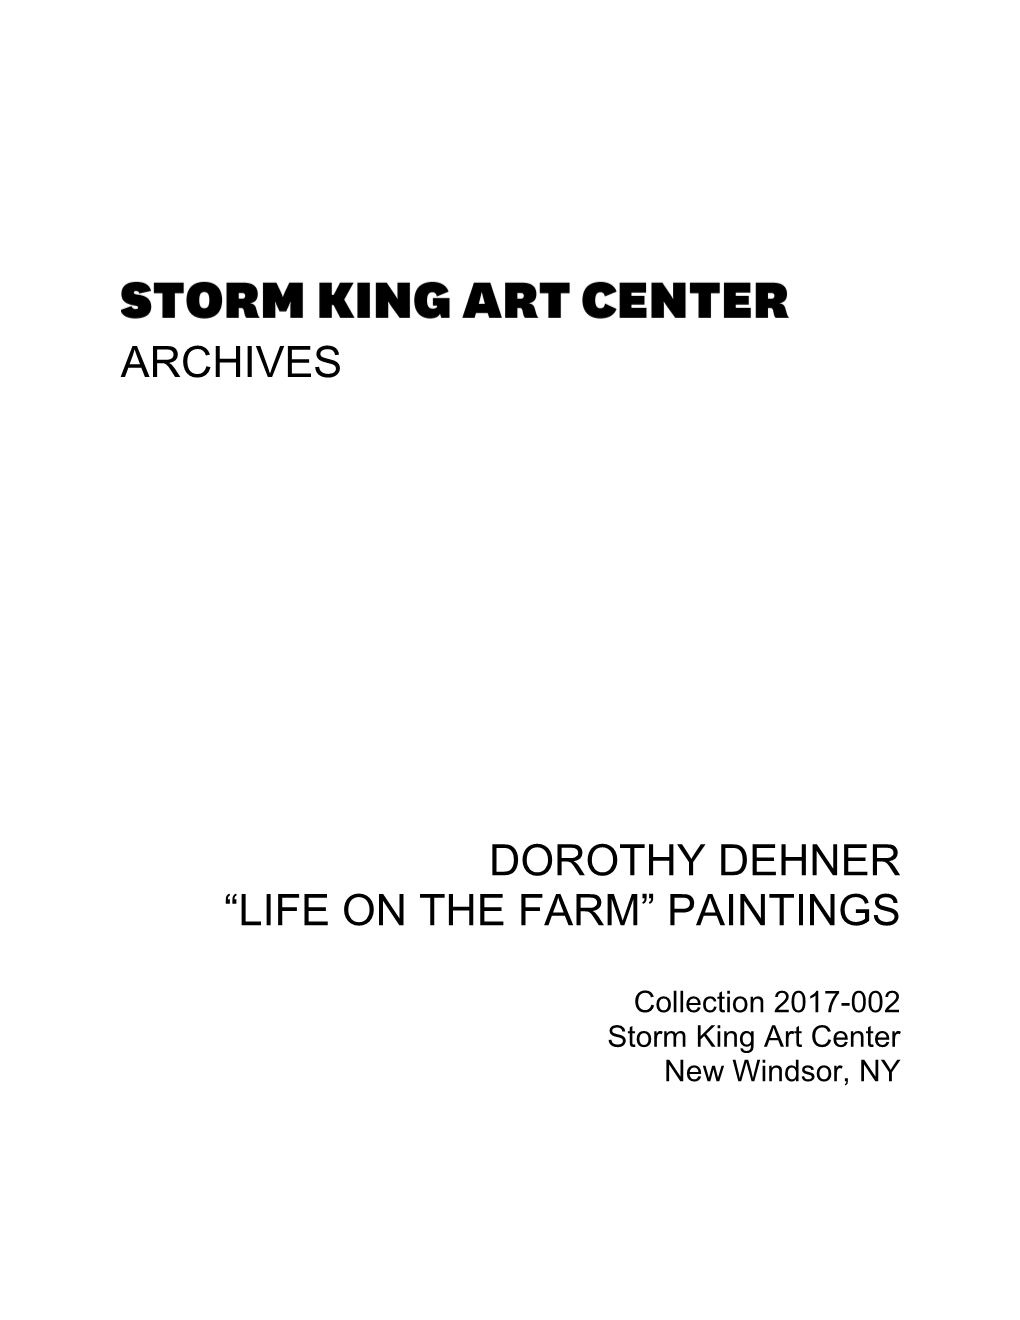 Archives Dorothy Dehner “Life on the Farm” Paintings